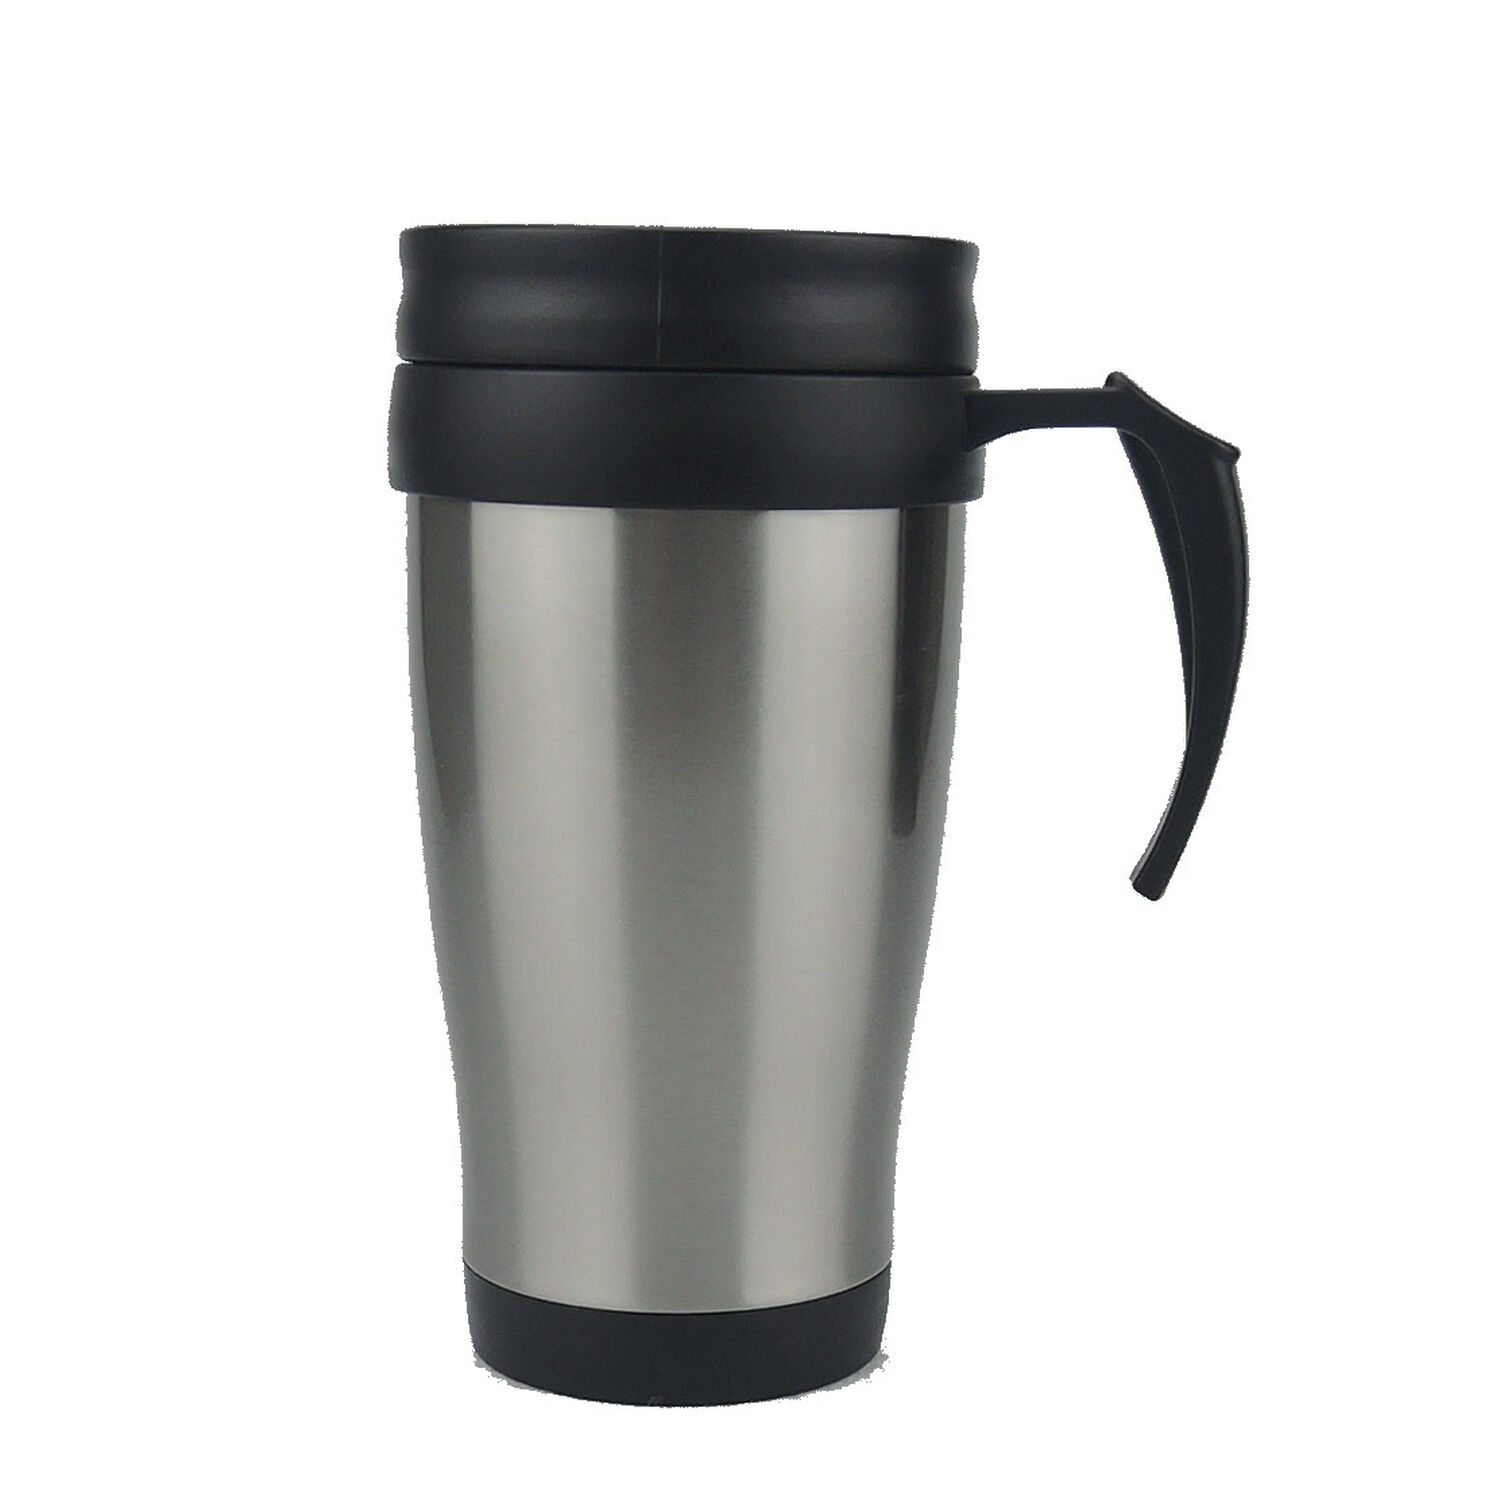 Stainless Steel Travel Mug 400ml - Home Store + More